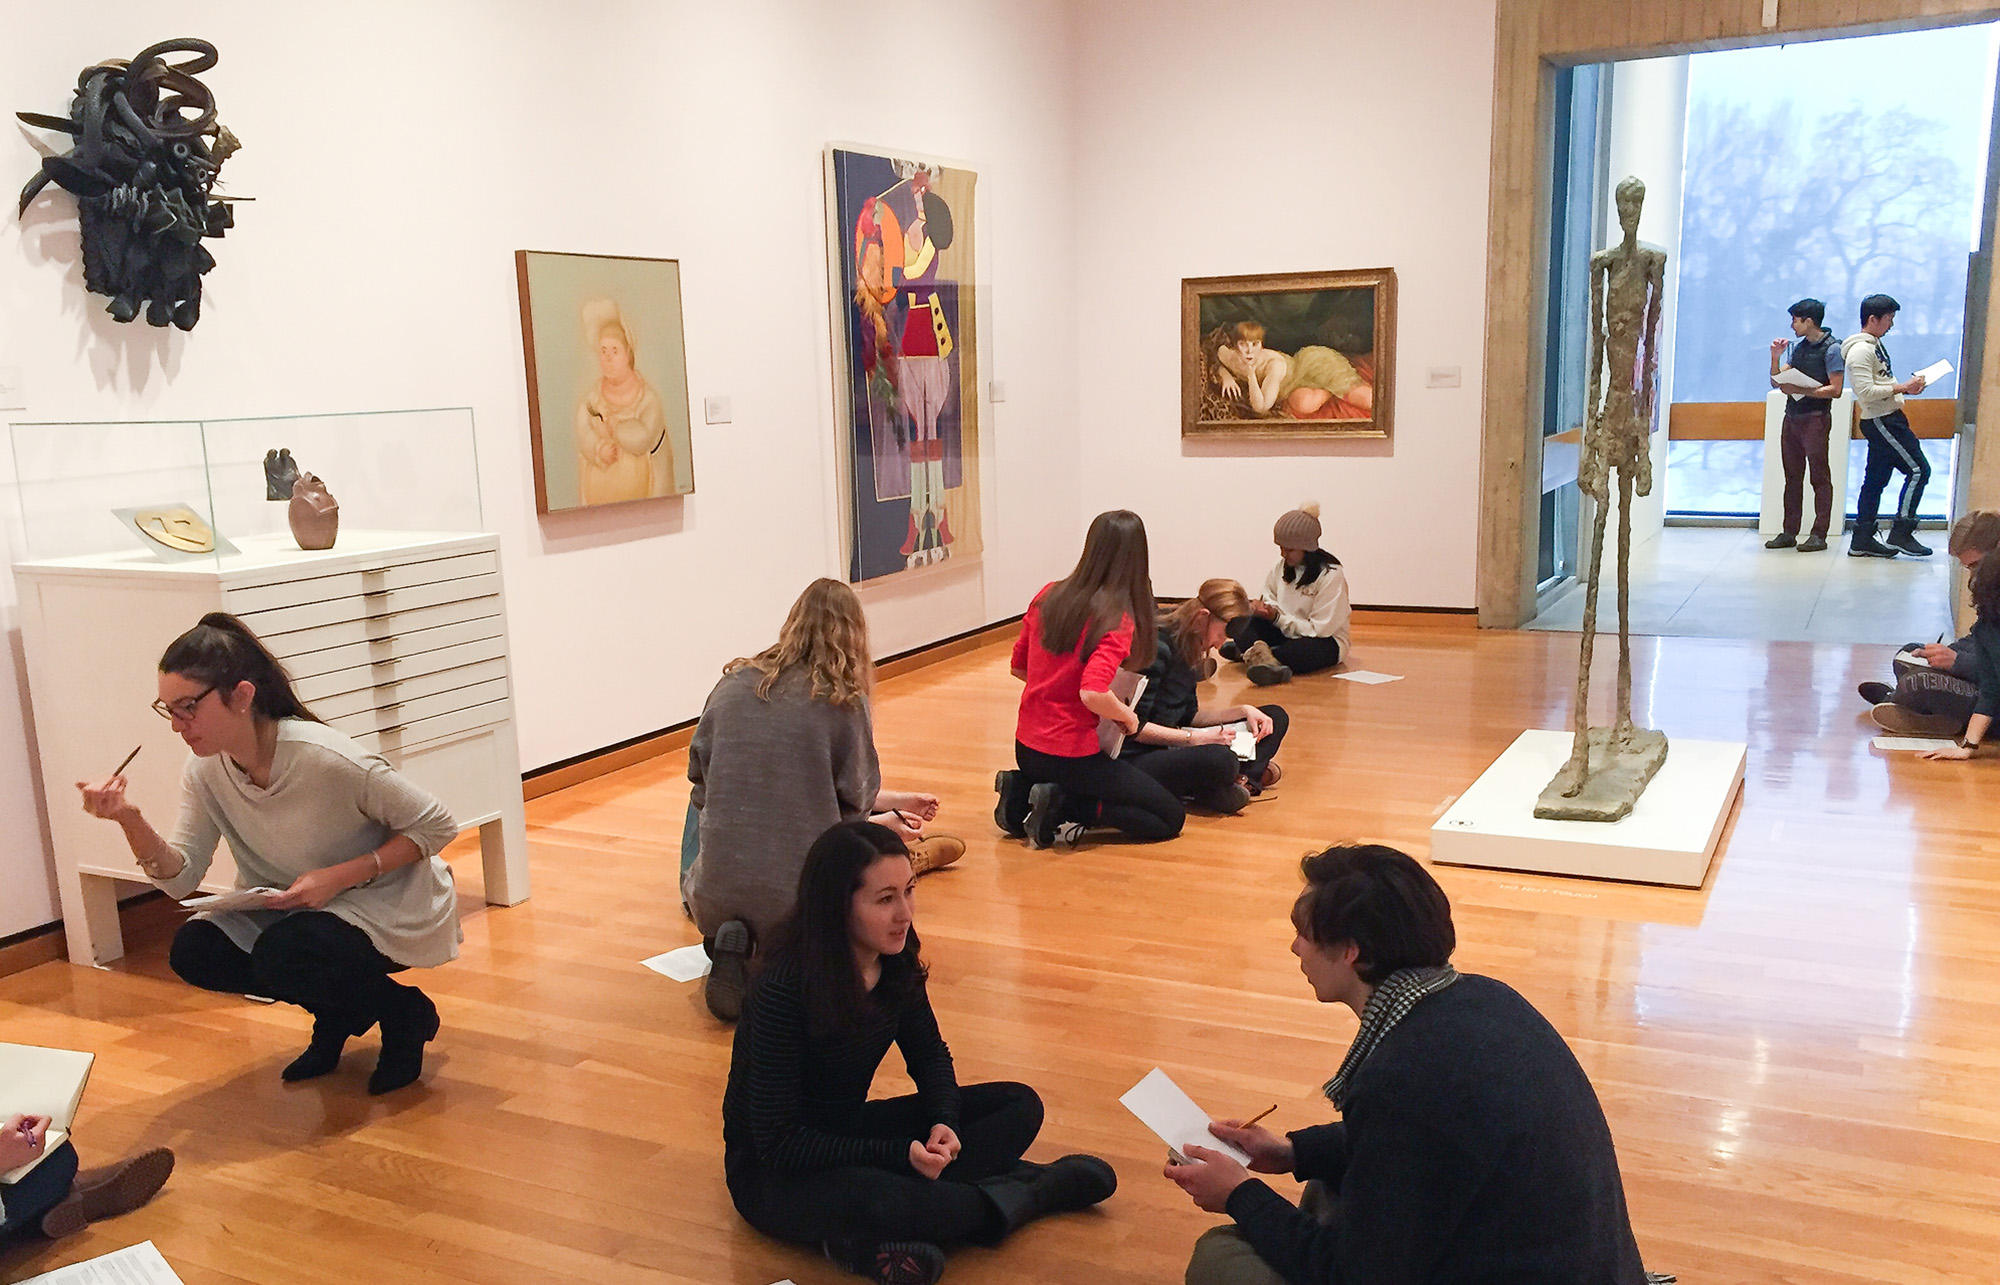 A group of college students sitting on the floor of a museum art gallery working on an assigment